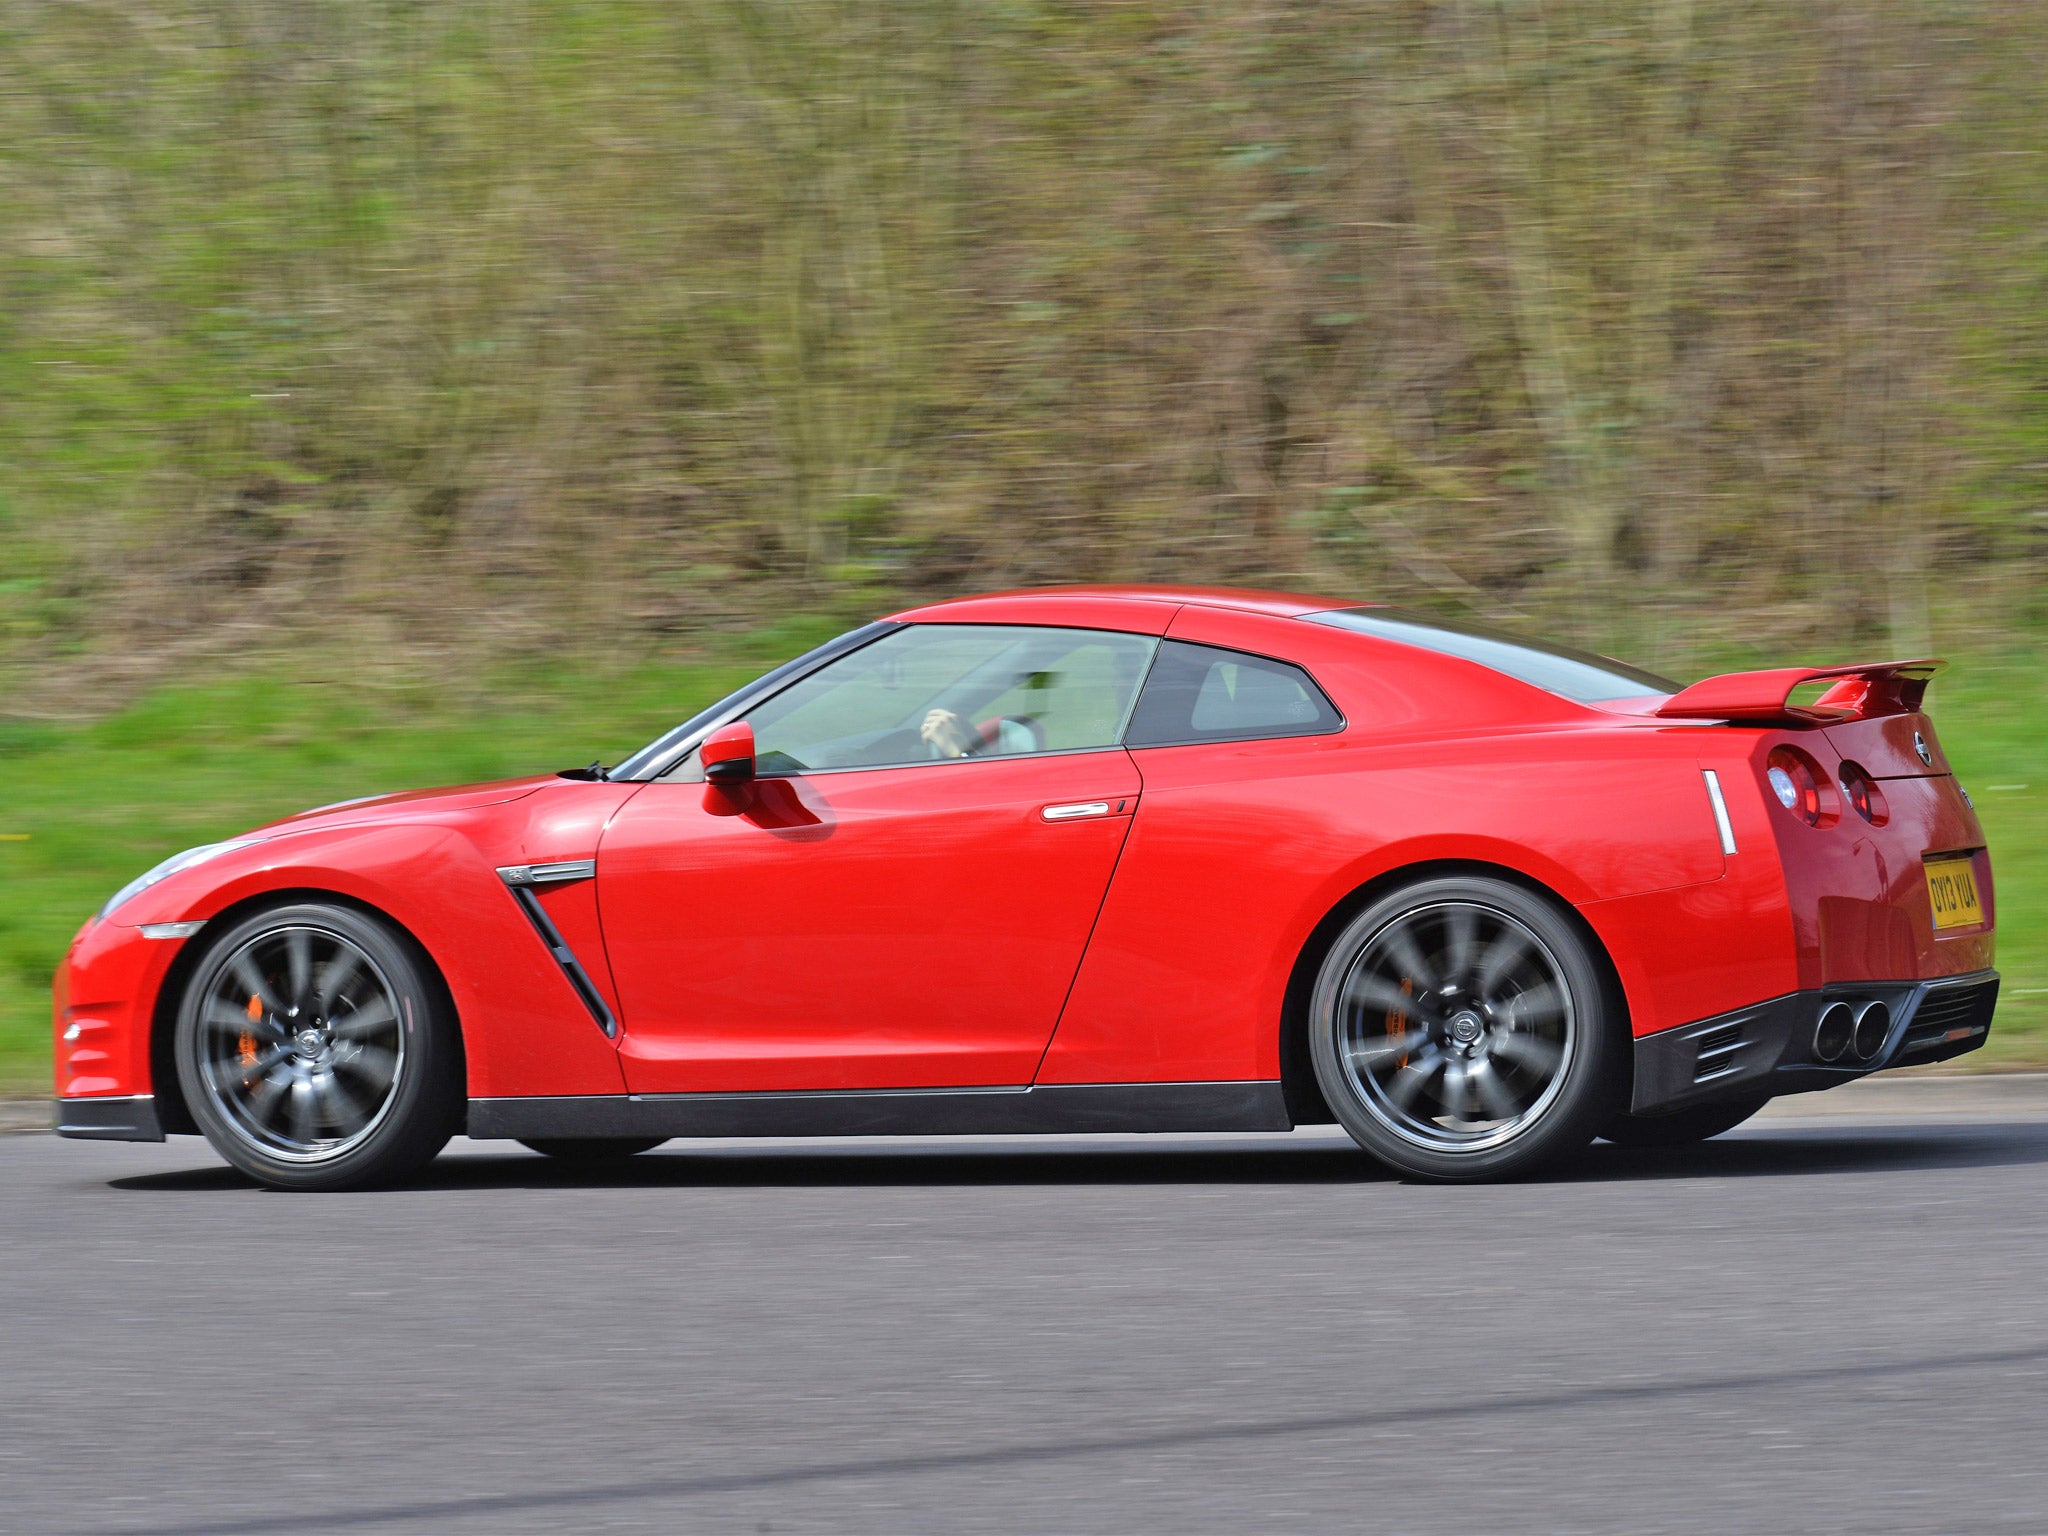 The new Nissan GT-R is a lot more powerful than its predecessor